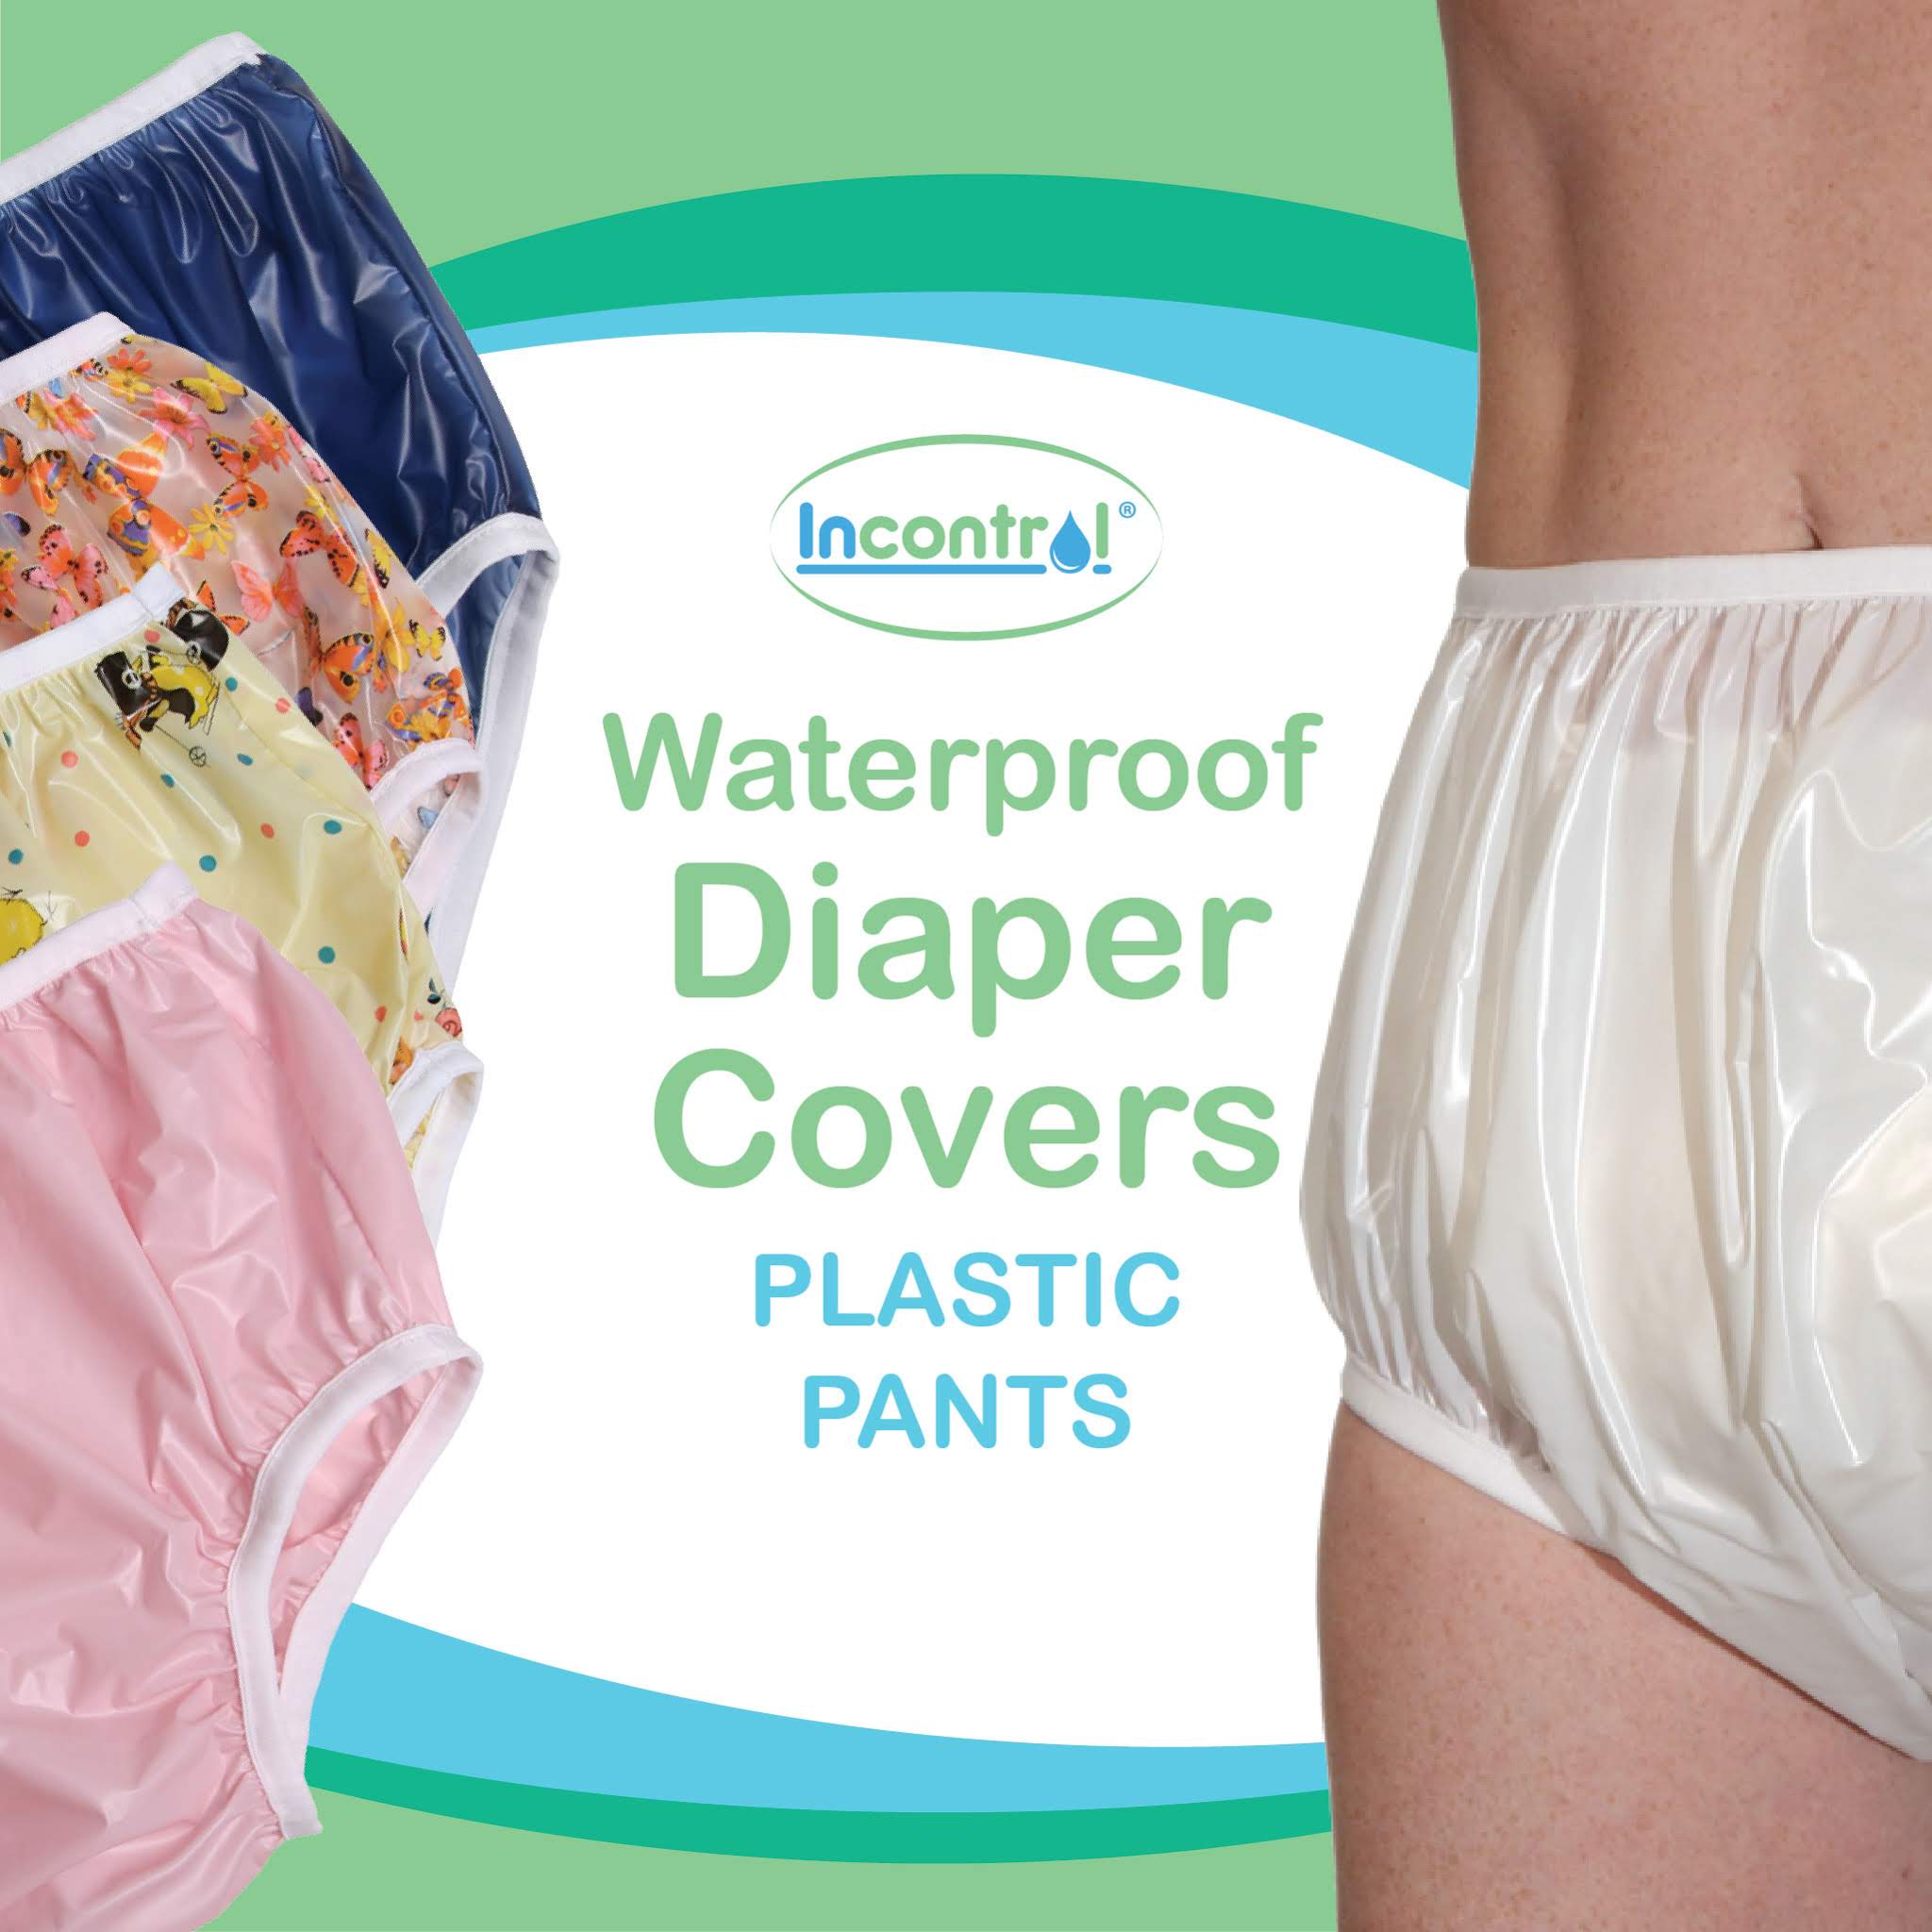 InControlDiapers on X: Protective Waterproof pants are an essential  accessory for anyone who deals with incontinence. Plastic Pants are great  for protecting against leaks!  #incontinence  #adultdiapers #diapercover #plasticpant